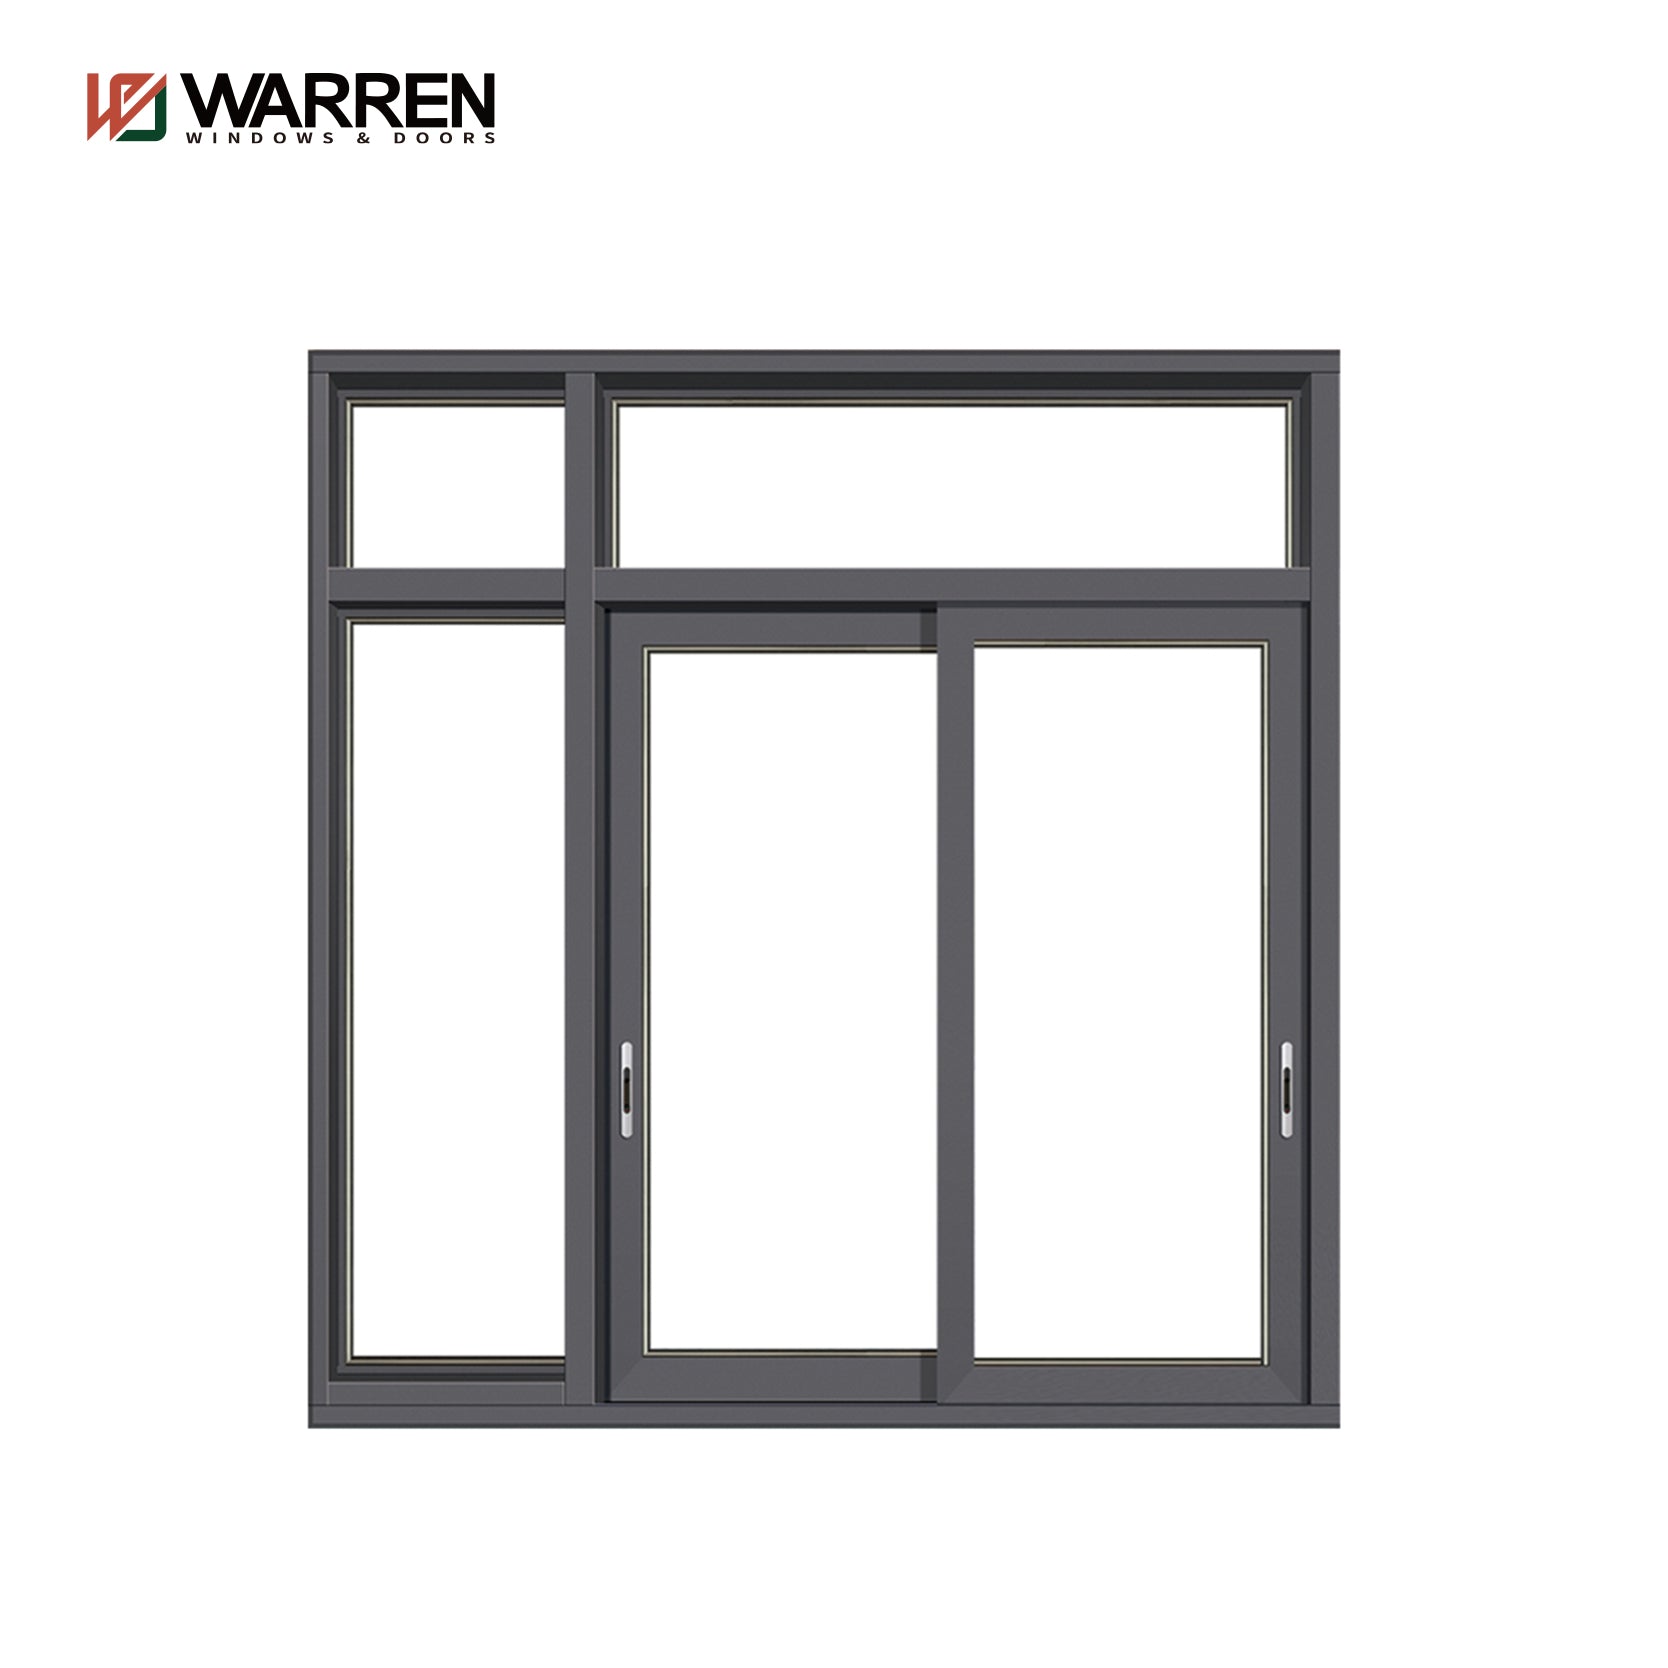 Warren Good Quality Products Aluminium Frame Sliding Glass Window For Various Rooms Of Villa Business Residence